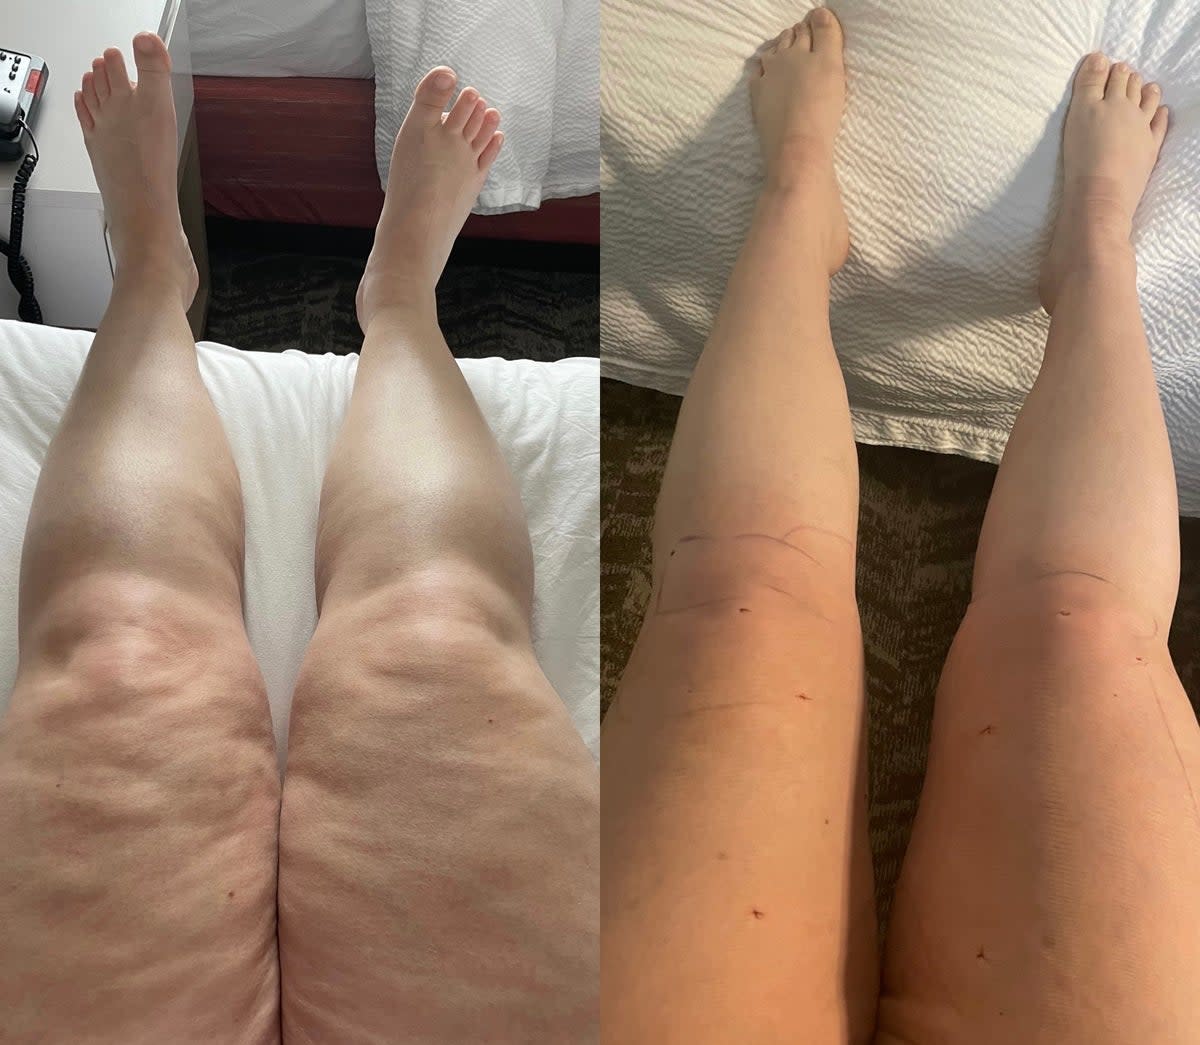 Before and after (Alisa Vandercruyssen / SWNS)